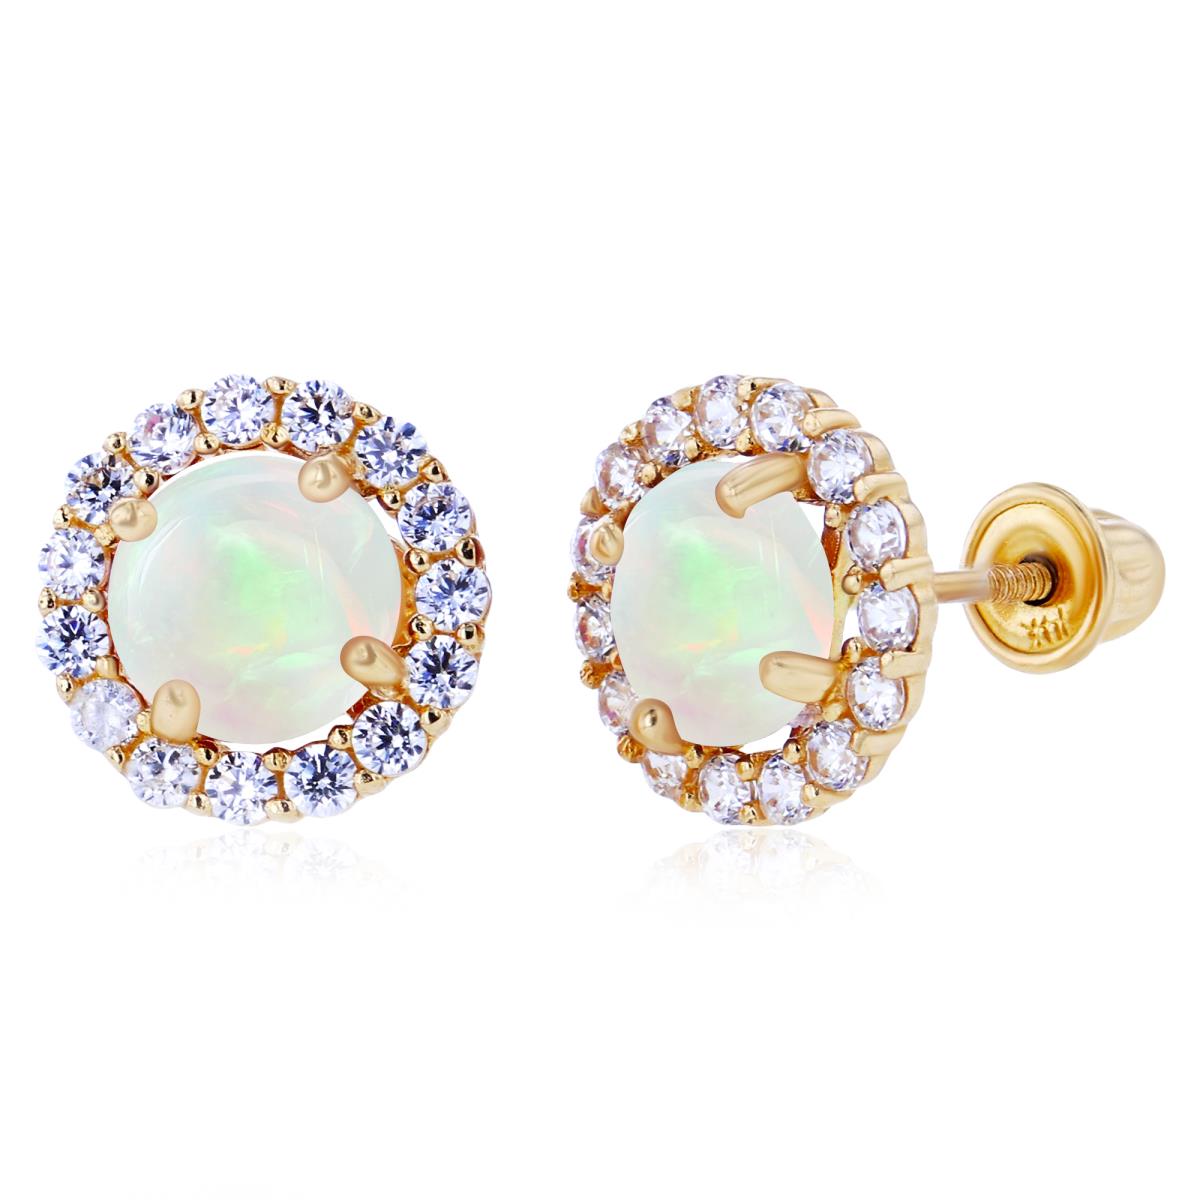 Sterlnig Silver Yellow 5mm Opal & 1.25mm Created White Sapphire Halo Screwback Earrings